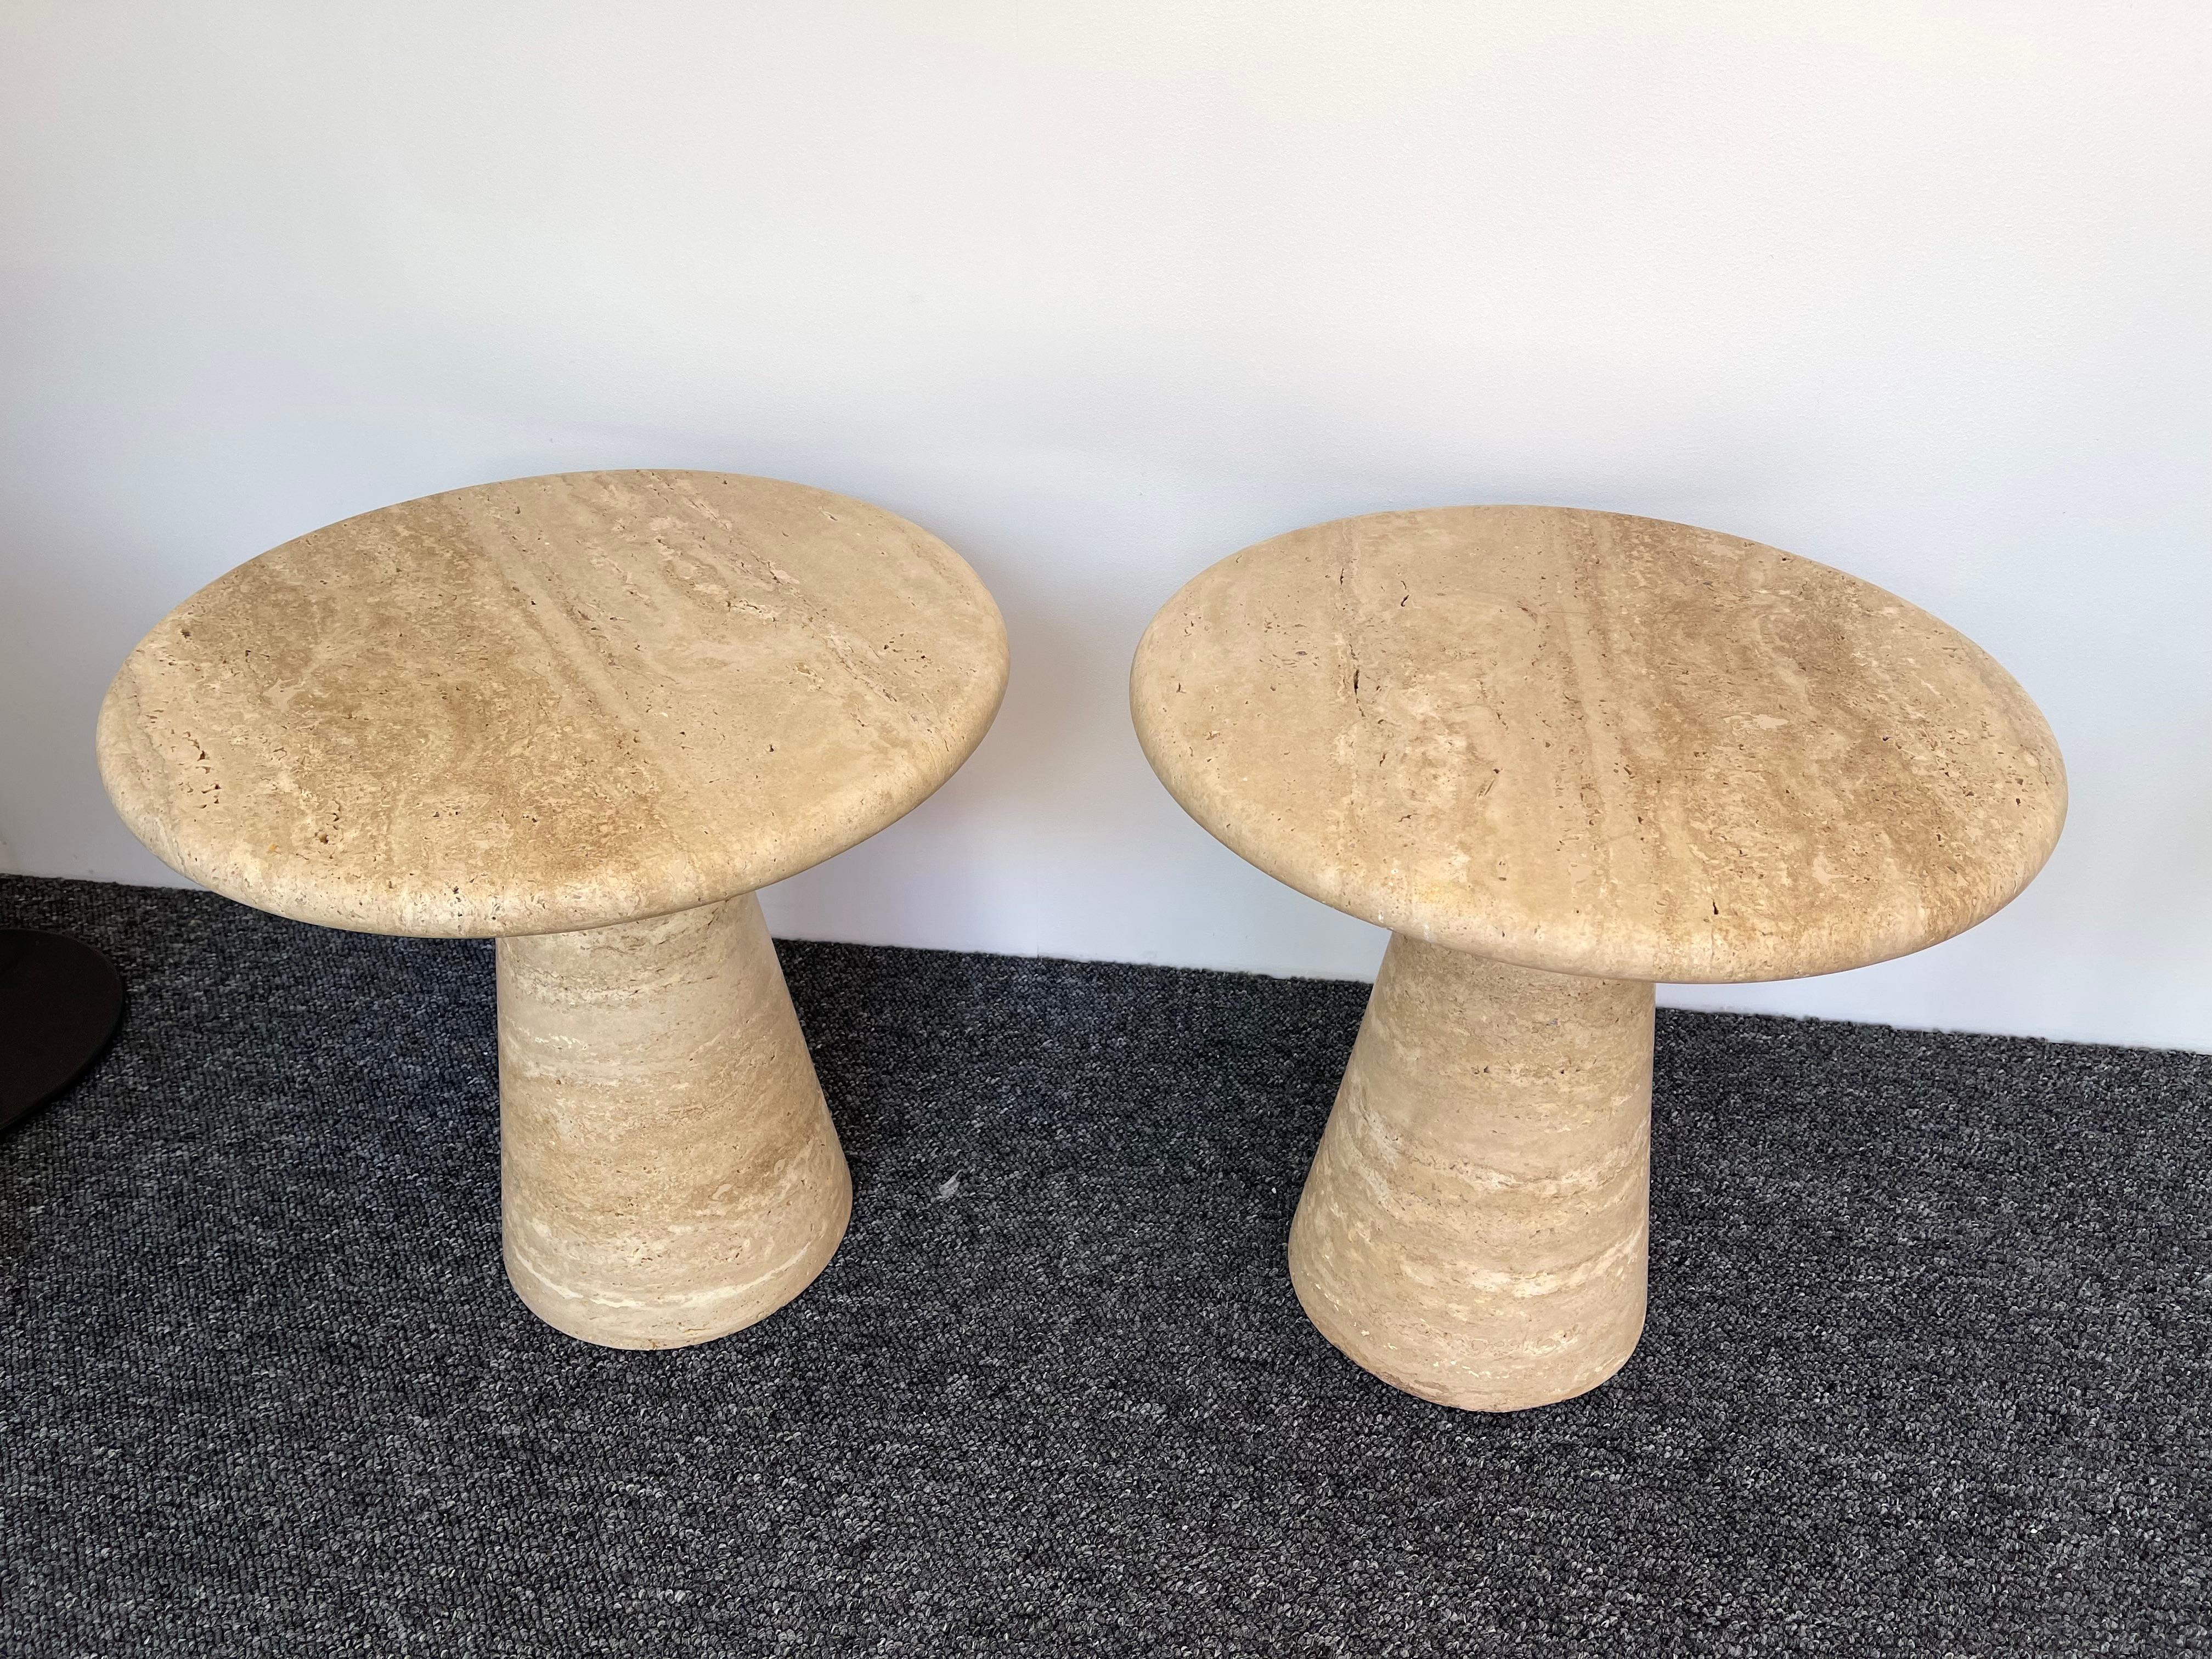 Mid-Century Modern Italian design 1970s style travertine side end low coffee cocktail bedside table or nightstand. In the mood of Angelo Mangiarotti for Skipper, Carlo Scarpa for Cattelan.

Price listed by table. In sale separately.
1 table available